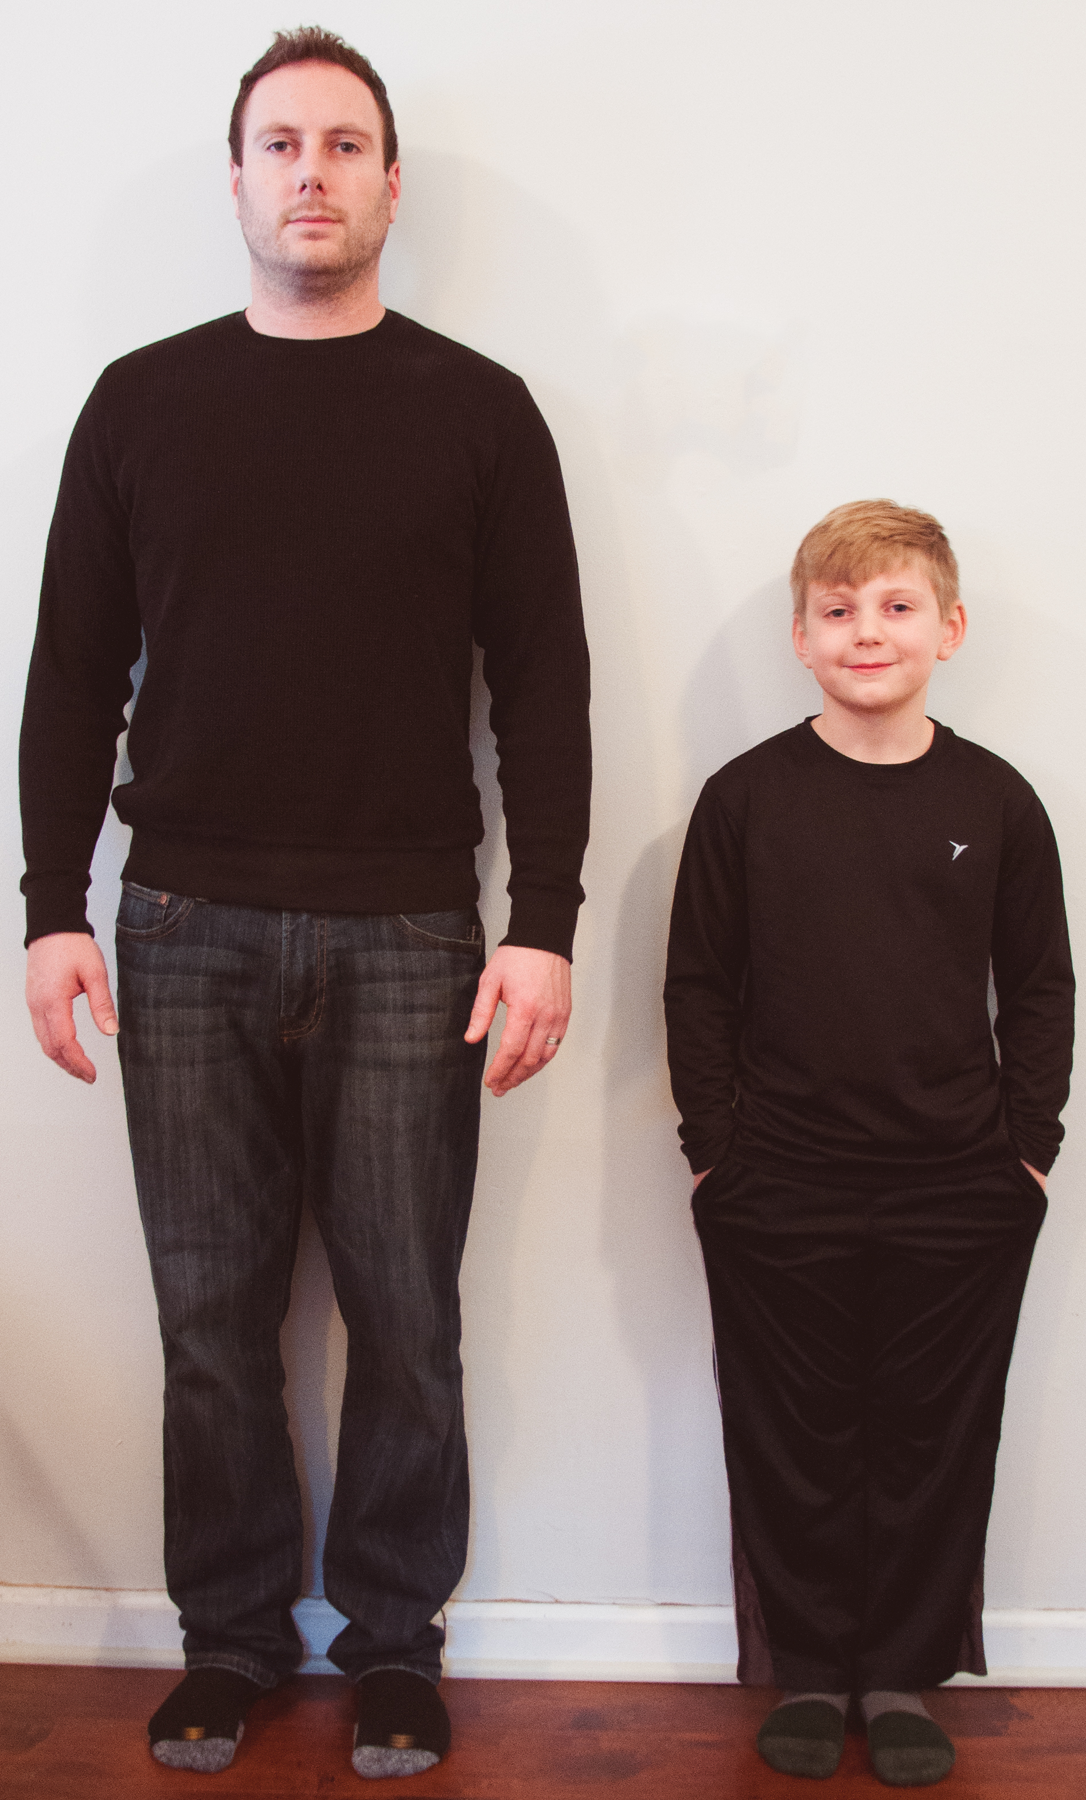 A picture of a man and boy standing next to each other. The top of the boy's head comes up to the chest of the man.